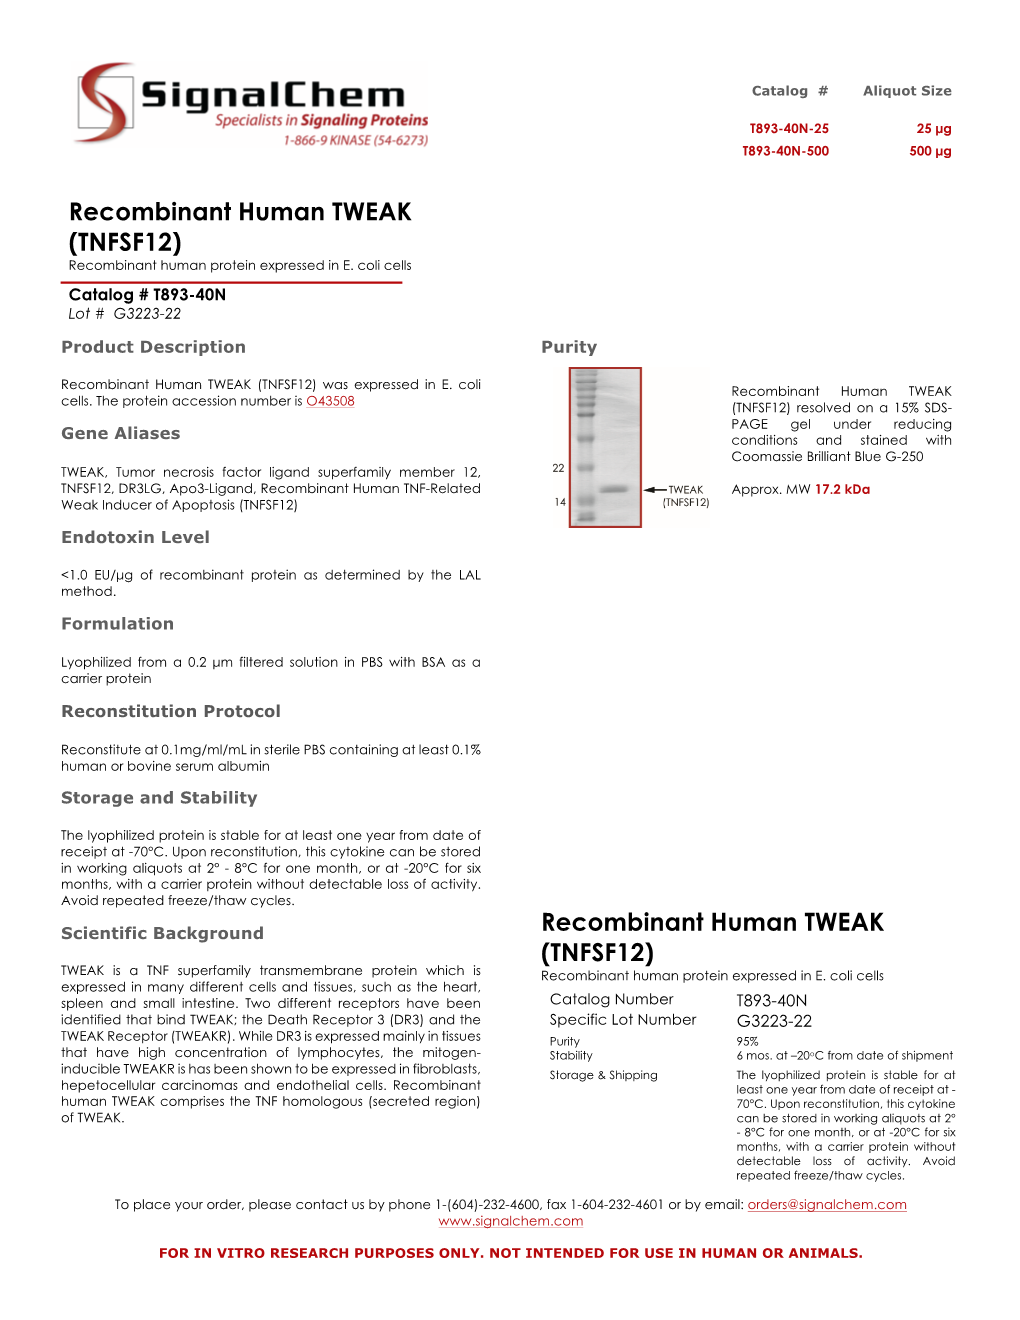 Recombinant Human TWEAK (TNFSF12) Recombinant Human Protein Expressed in E